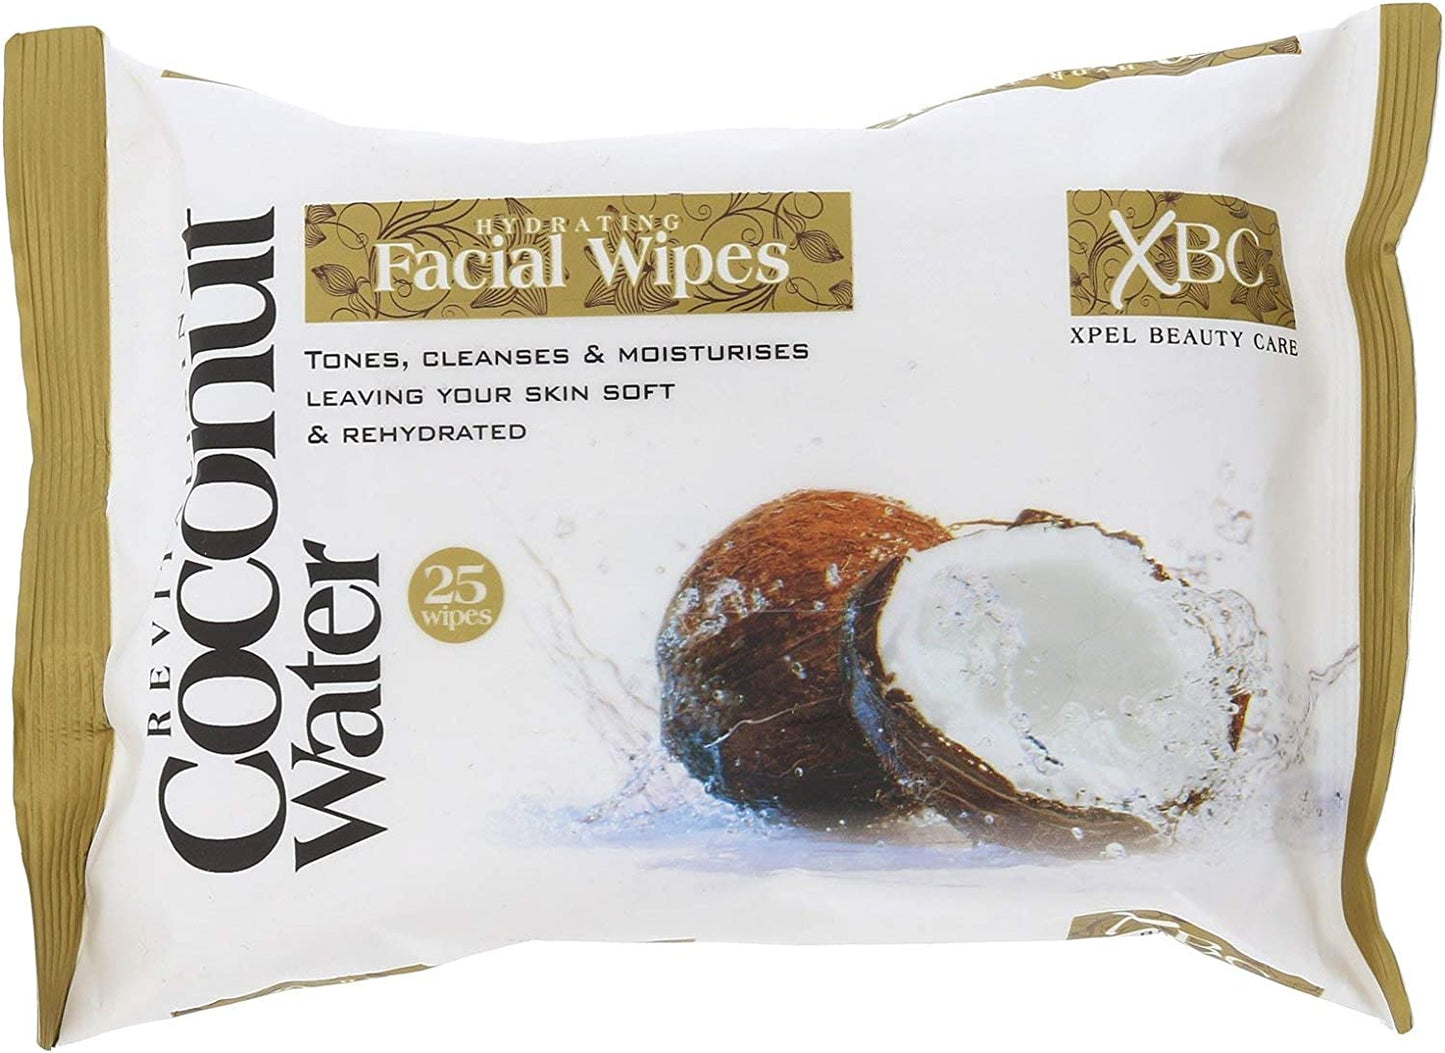 XBC COCONUT WATER FACIAL WIPES